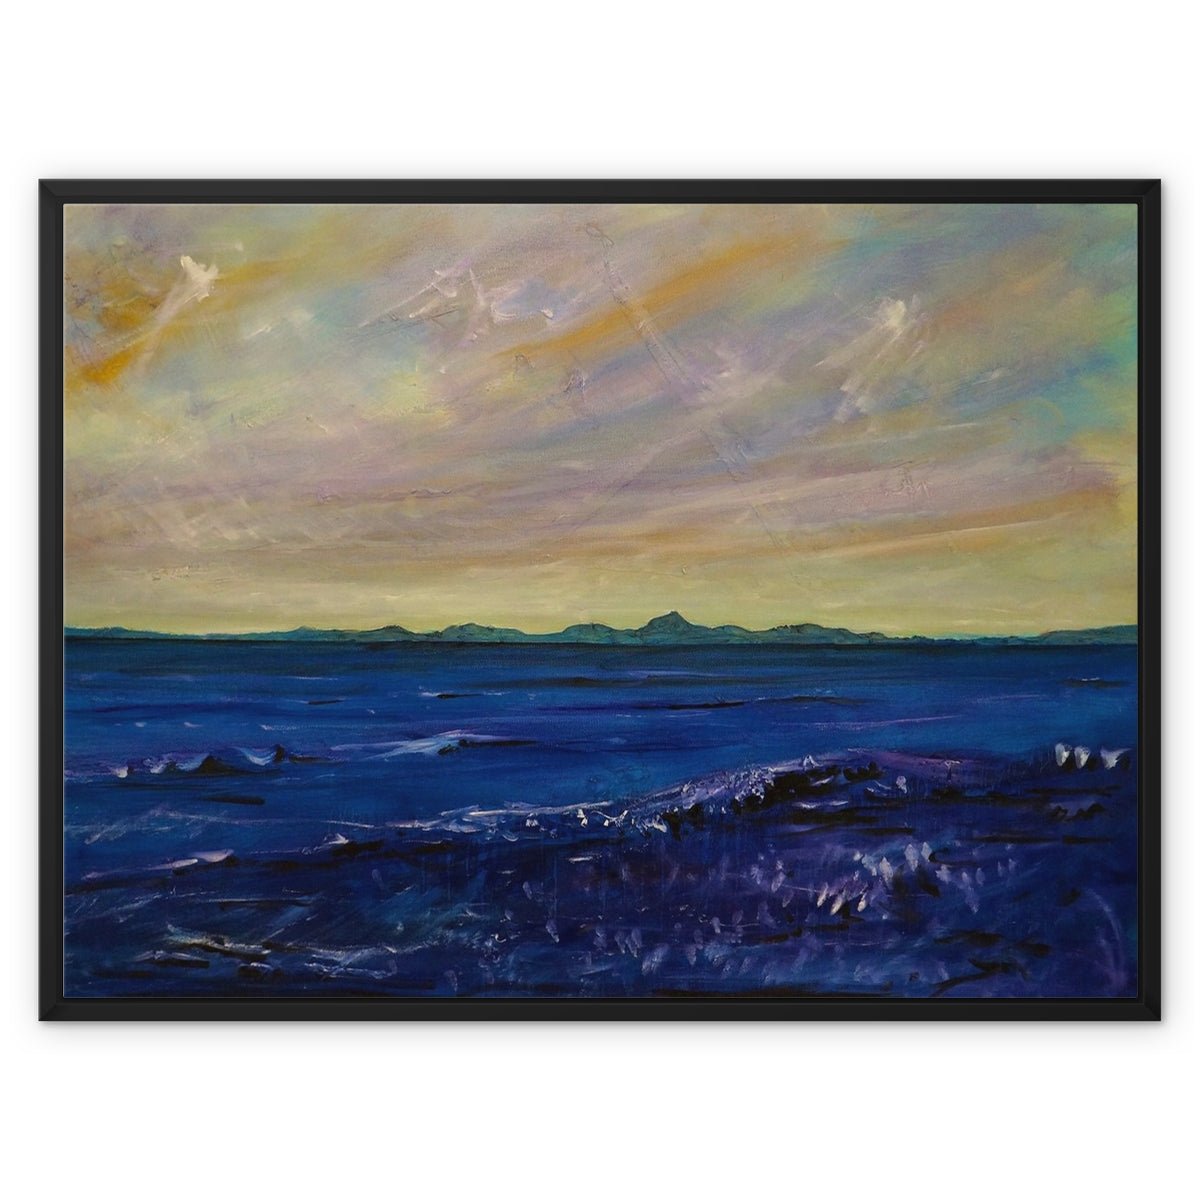 Jura Painting | Framed Canvas From Scotland-Floating Framed Canvas Prints-Hebridean Islands Art Gallery-32"x24"-Black Frame-Paintings, Prints, Homeware, Art Gifts From Scotland By Scottish Artist Kevin Hunter